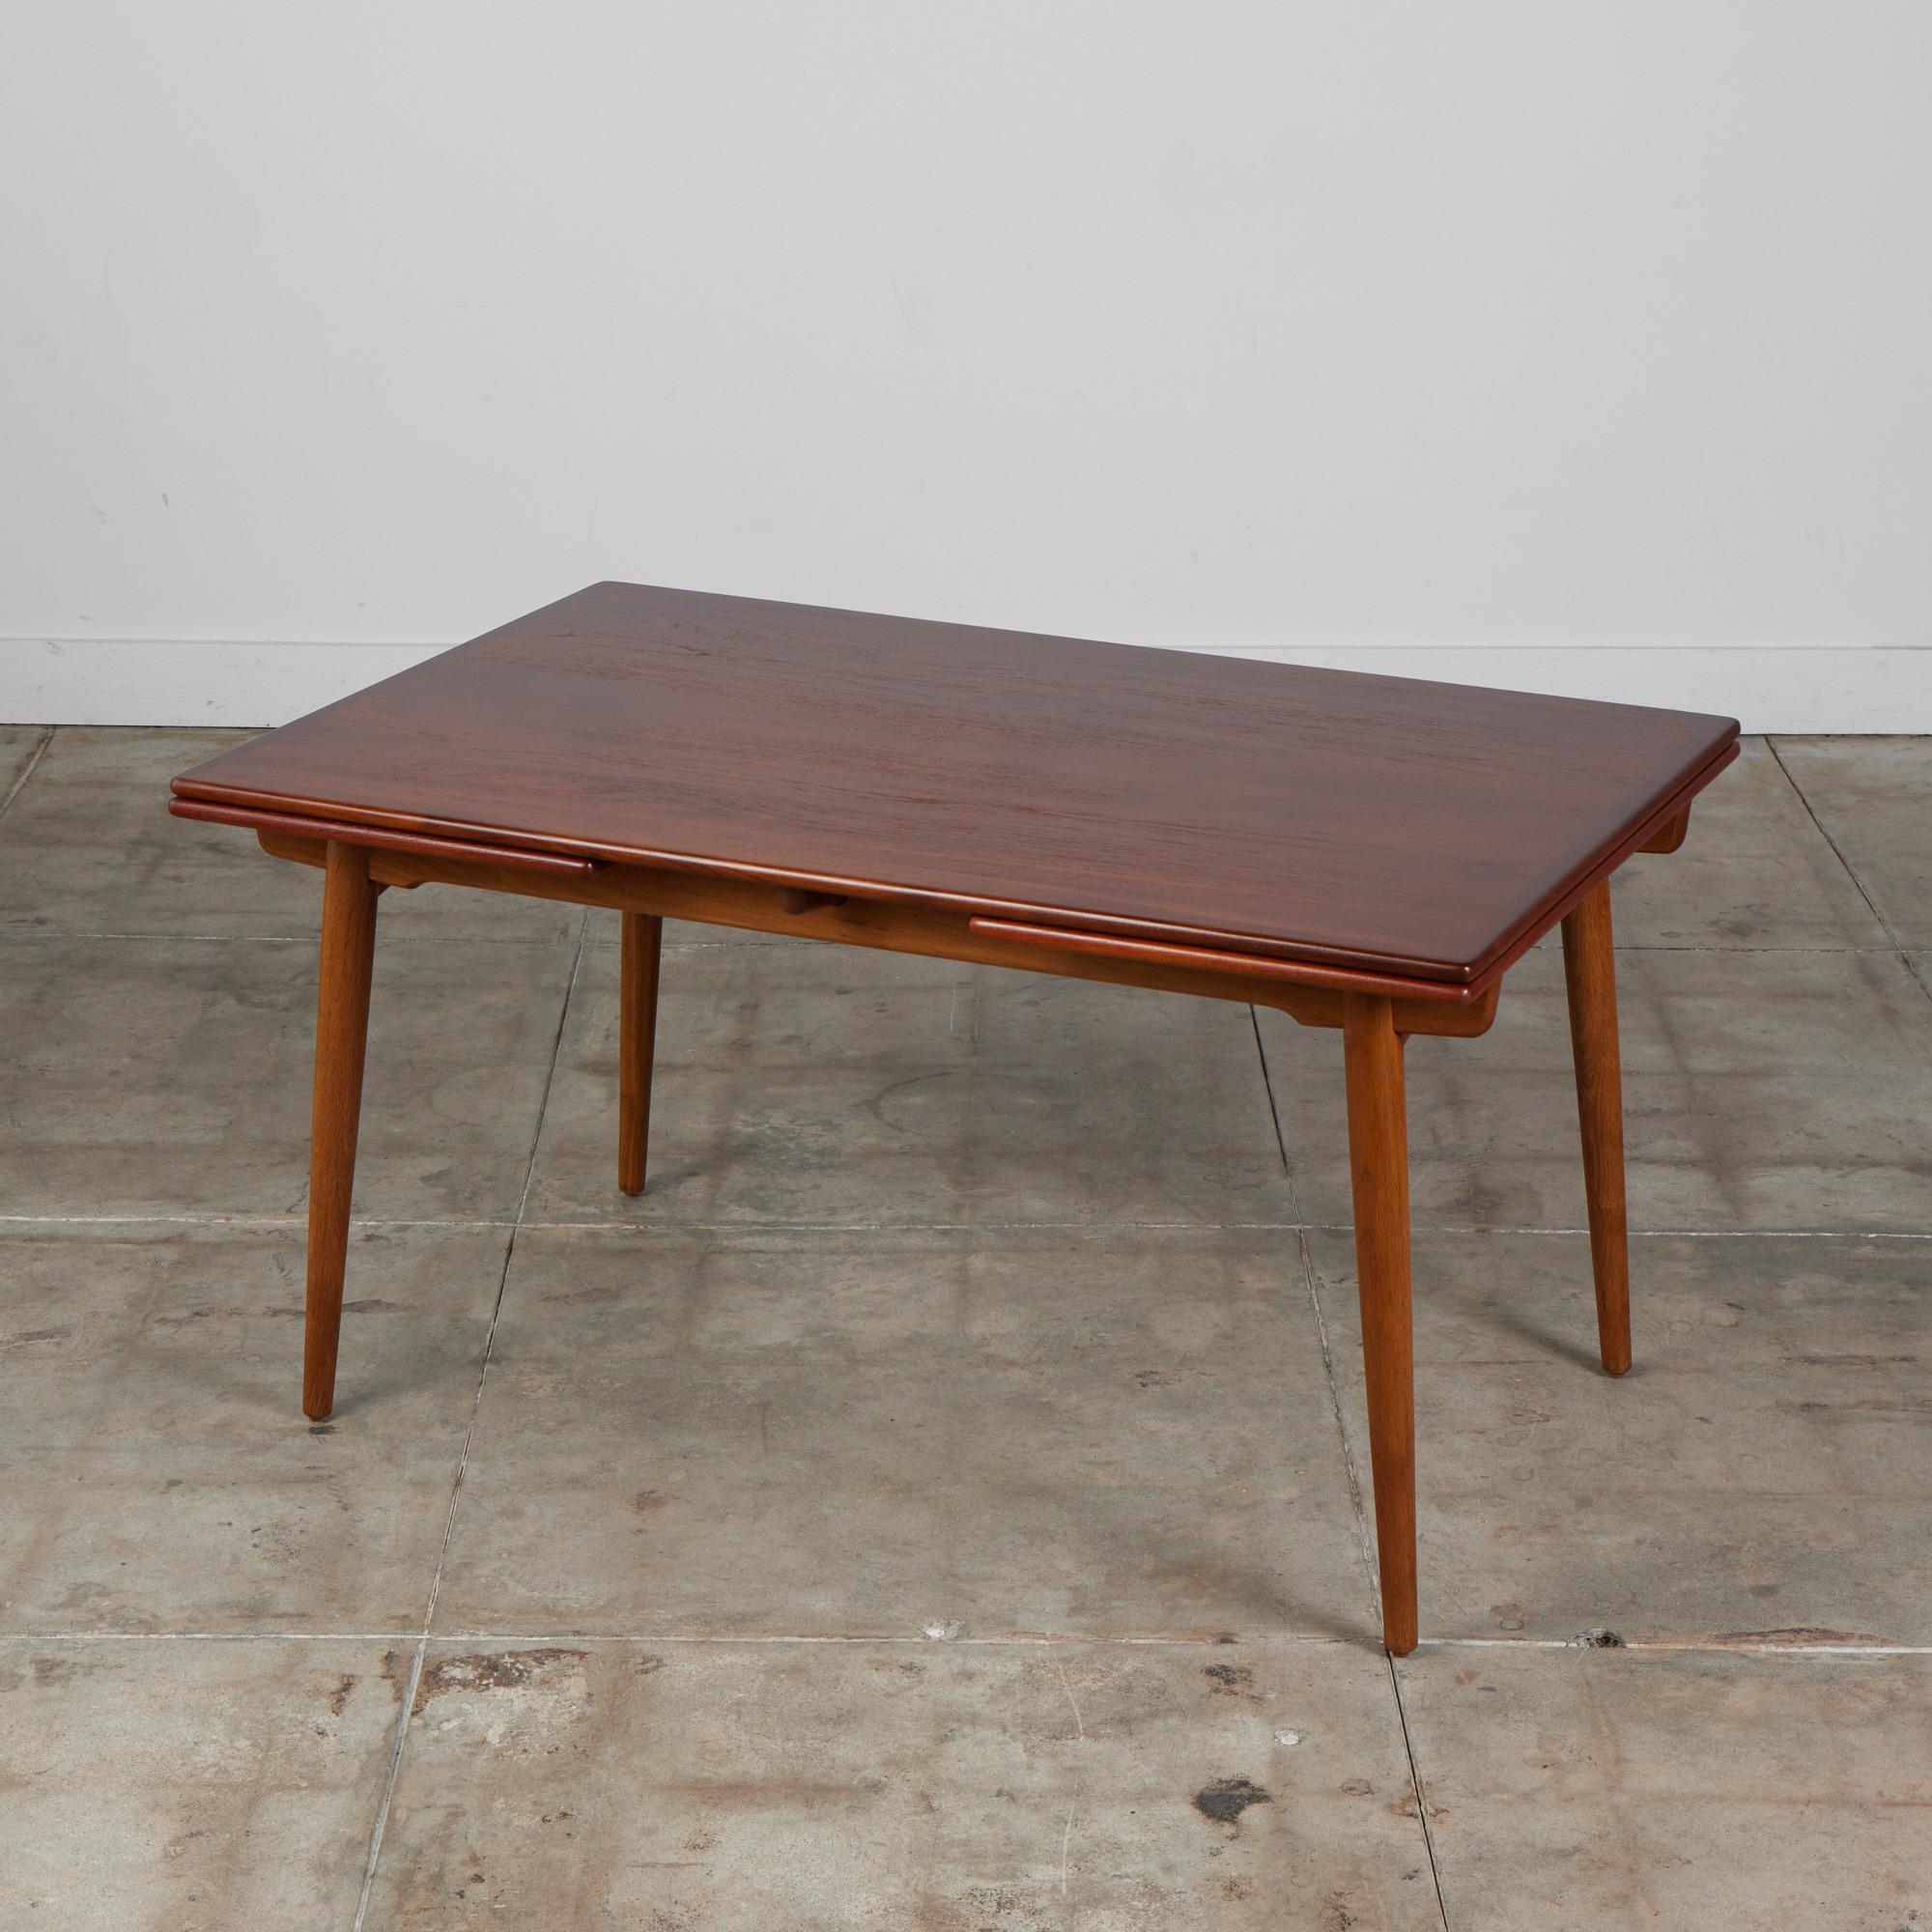 Teak top dining table by Hans J. Wegner for Andreas Tuck, c.1950s, Denmark.
This rectangular teak table features two leaves that extend from underneath the table to increase the tables length in 94 inches when fully extended. The table top sits